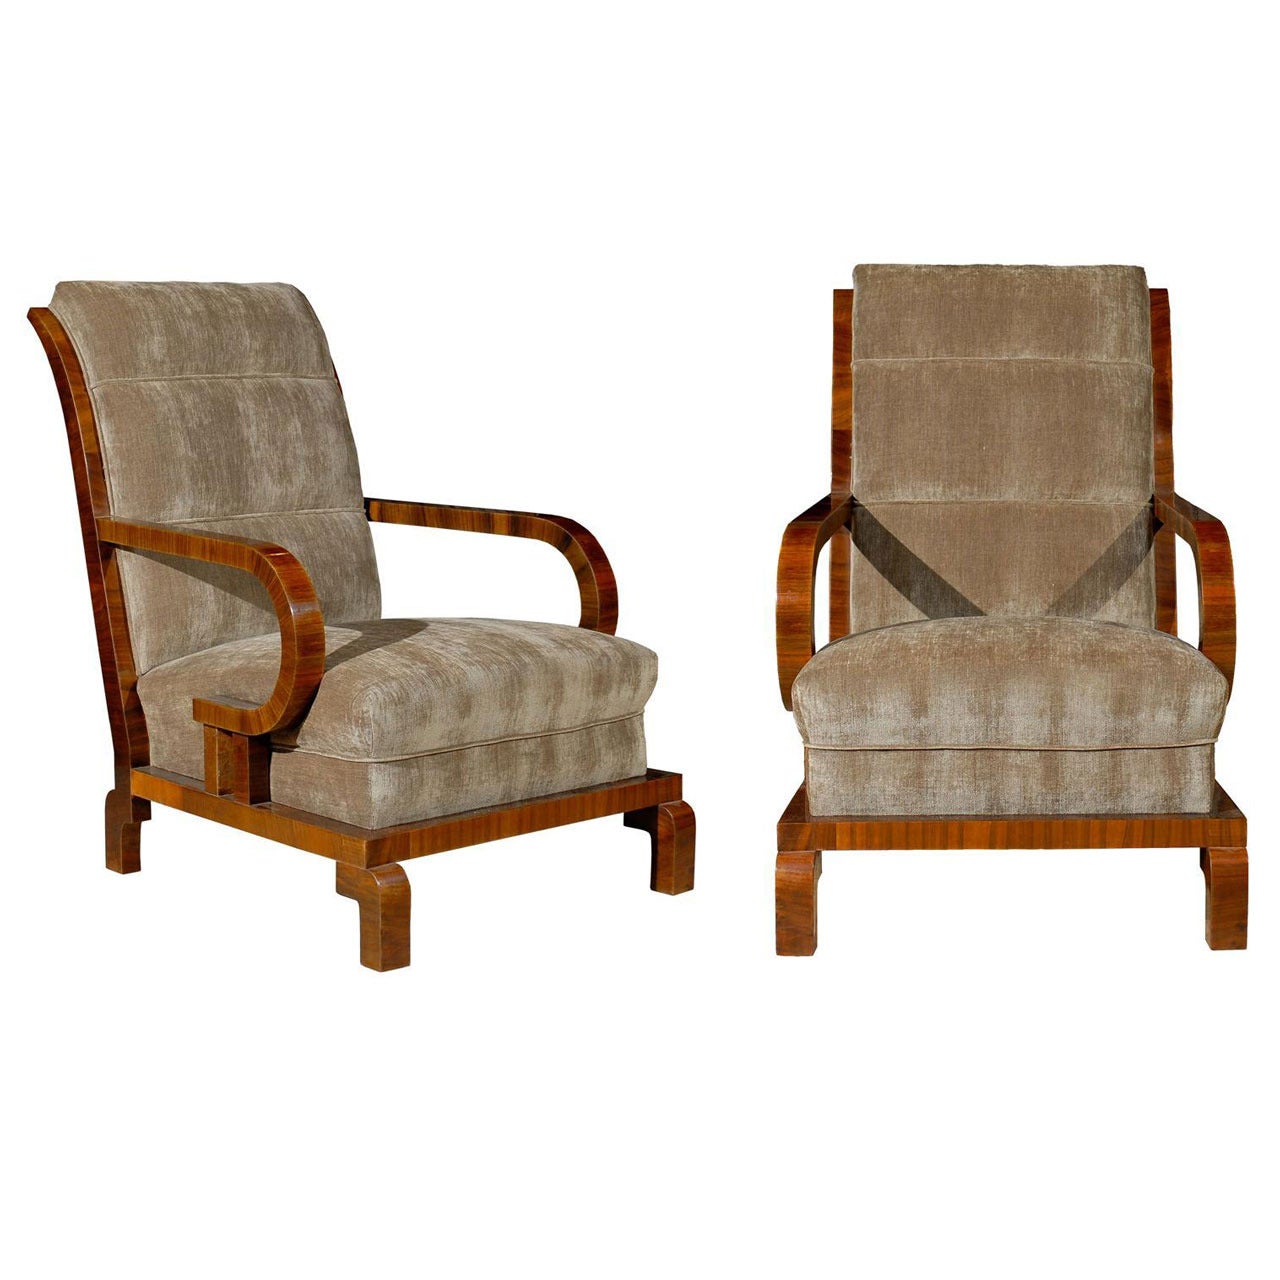 Pair of 1930s Art Deco Period Hungarian Club Chairs with Brown Velour Upholstery